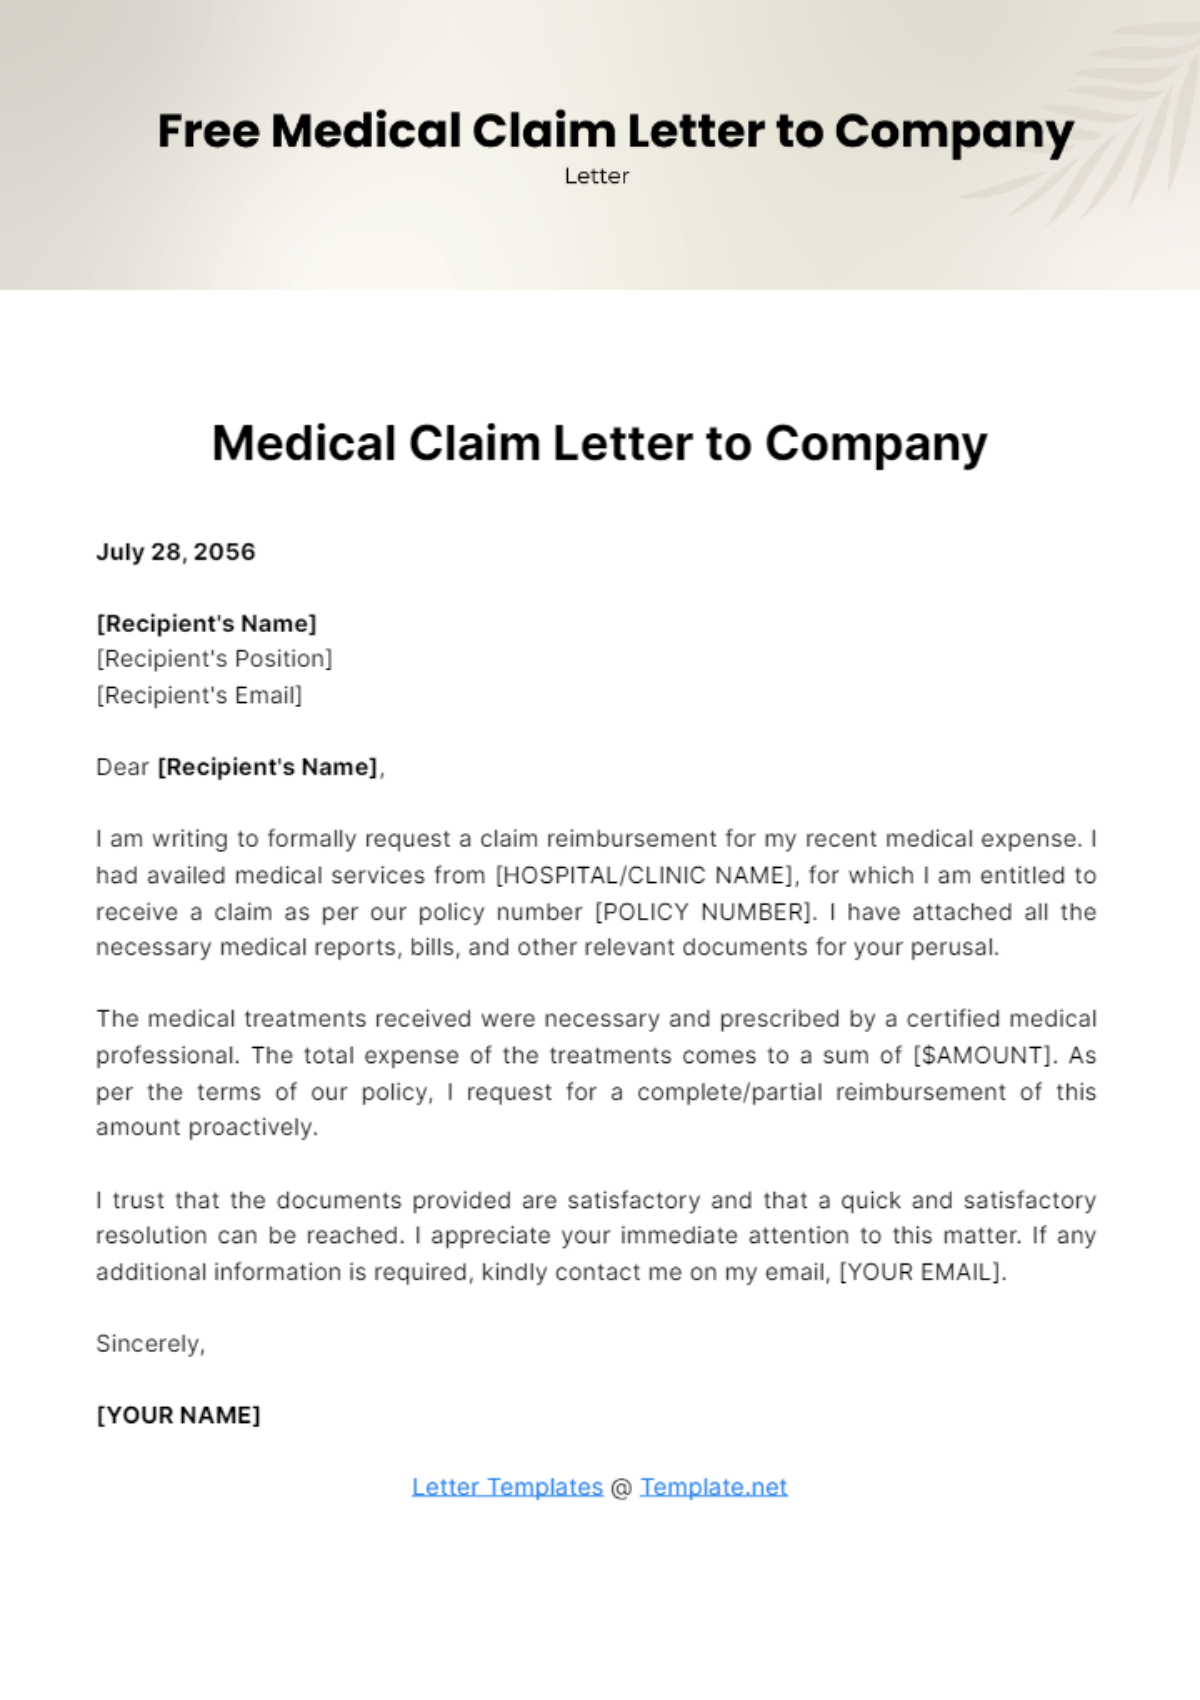 Free Medical Claim Letter to Company Template